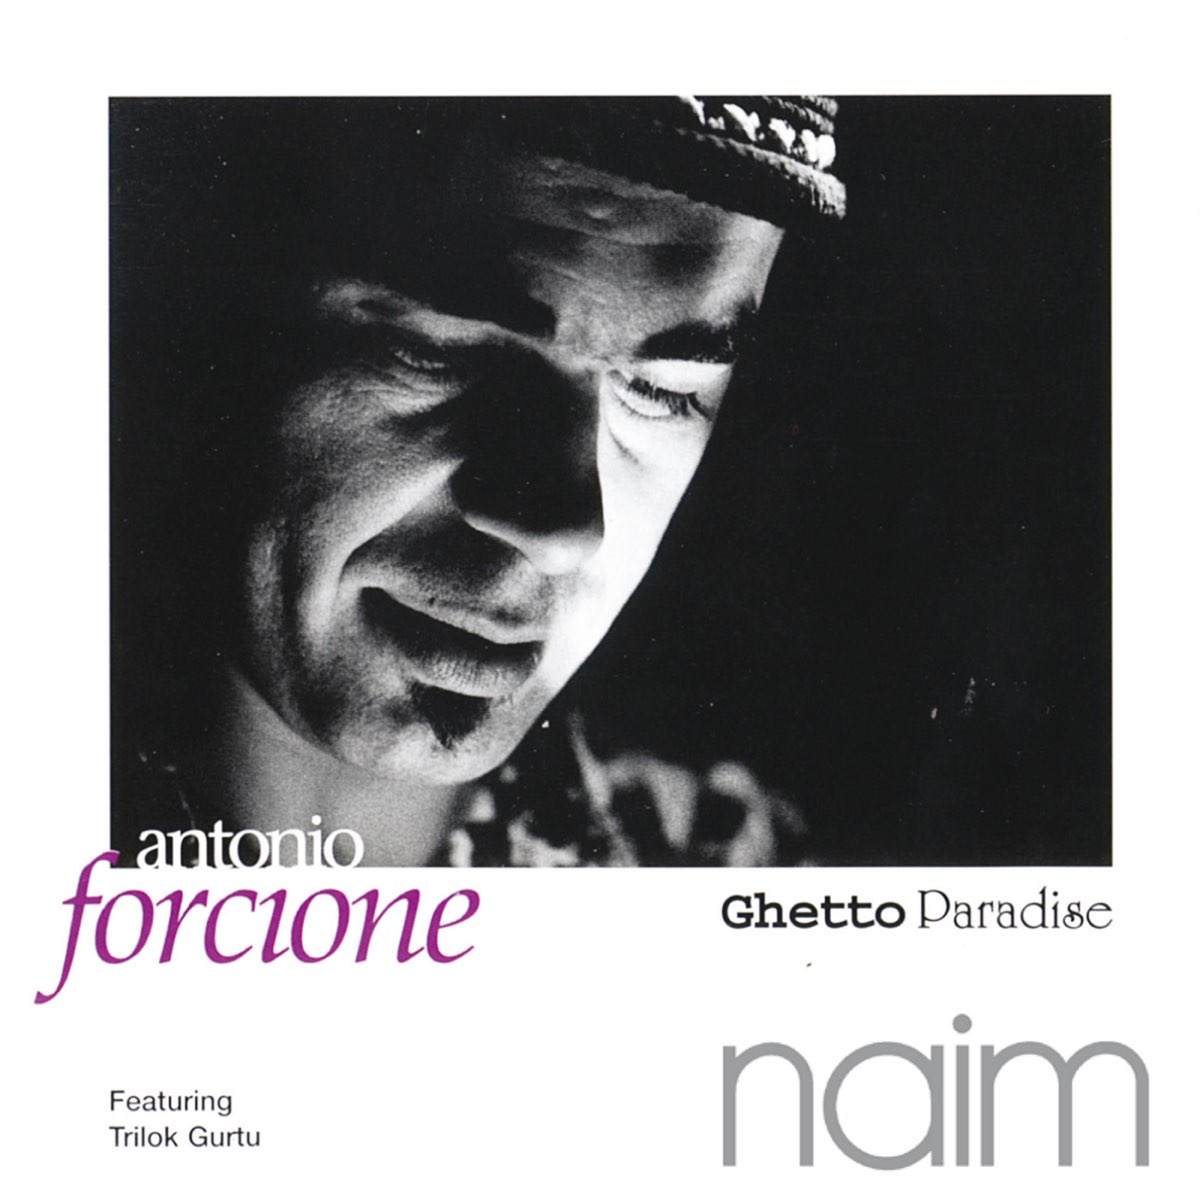 Ghetto Paradise by Antonio Forcione on Apple Music